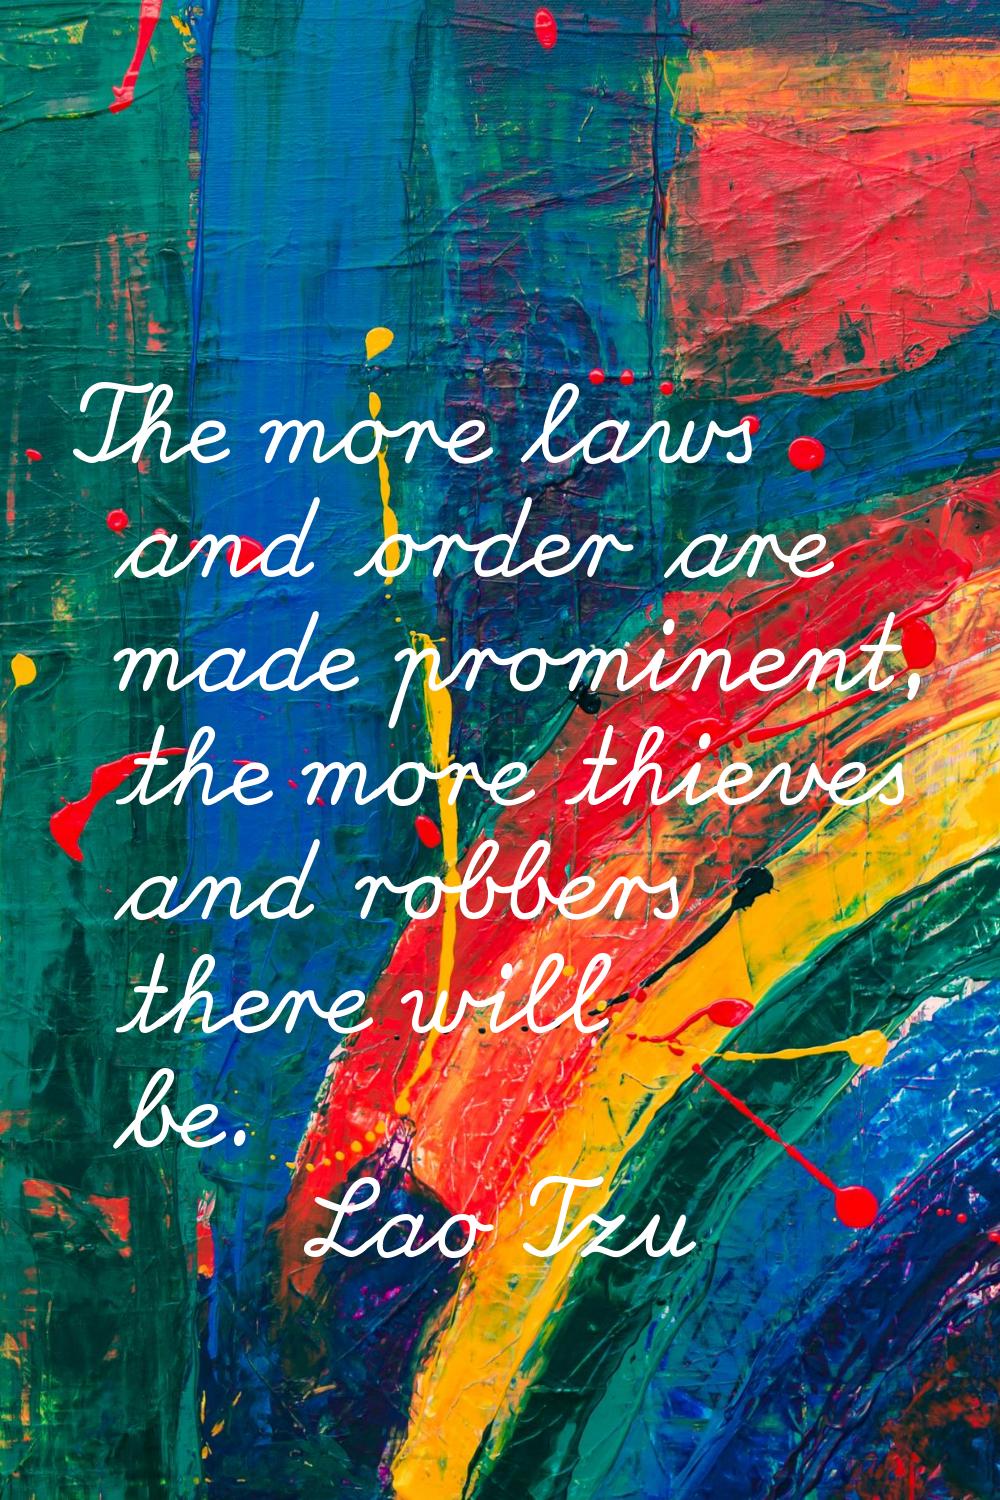 The more laws and order are made prominent, the more thieves and robbers there will be.